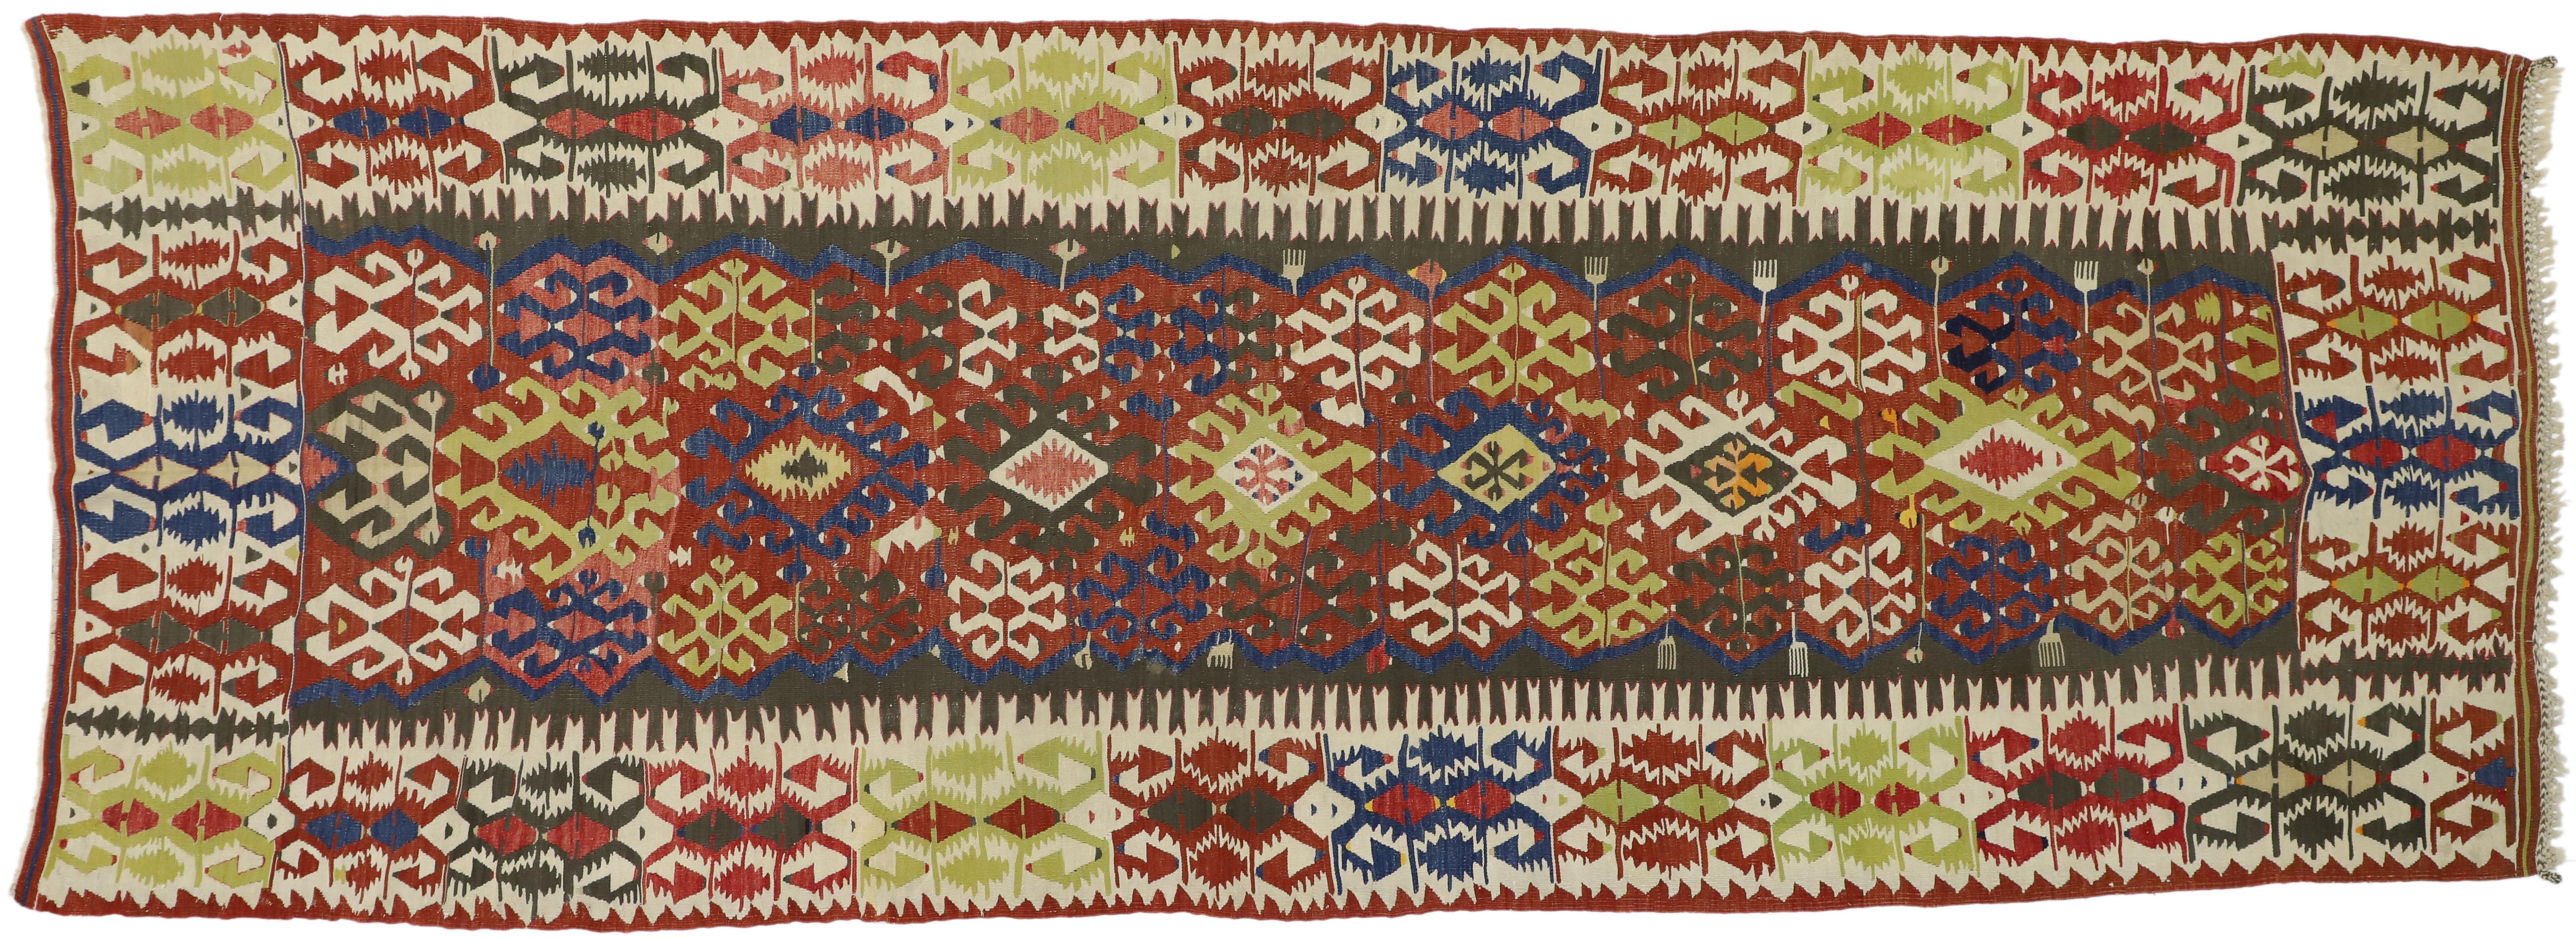 73271, antique Caucasian Kilim runner with Tribal style. This handwoven wool antique Caucasian Kilim runner with Tribal style is anything but boring. It features an all-over geometric pattern composed of ancient tribal symbols: Ram's Horn,